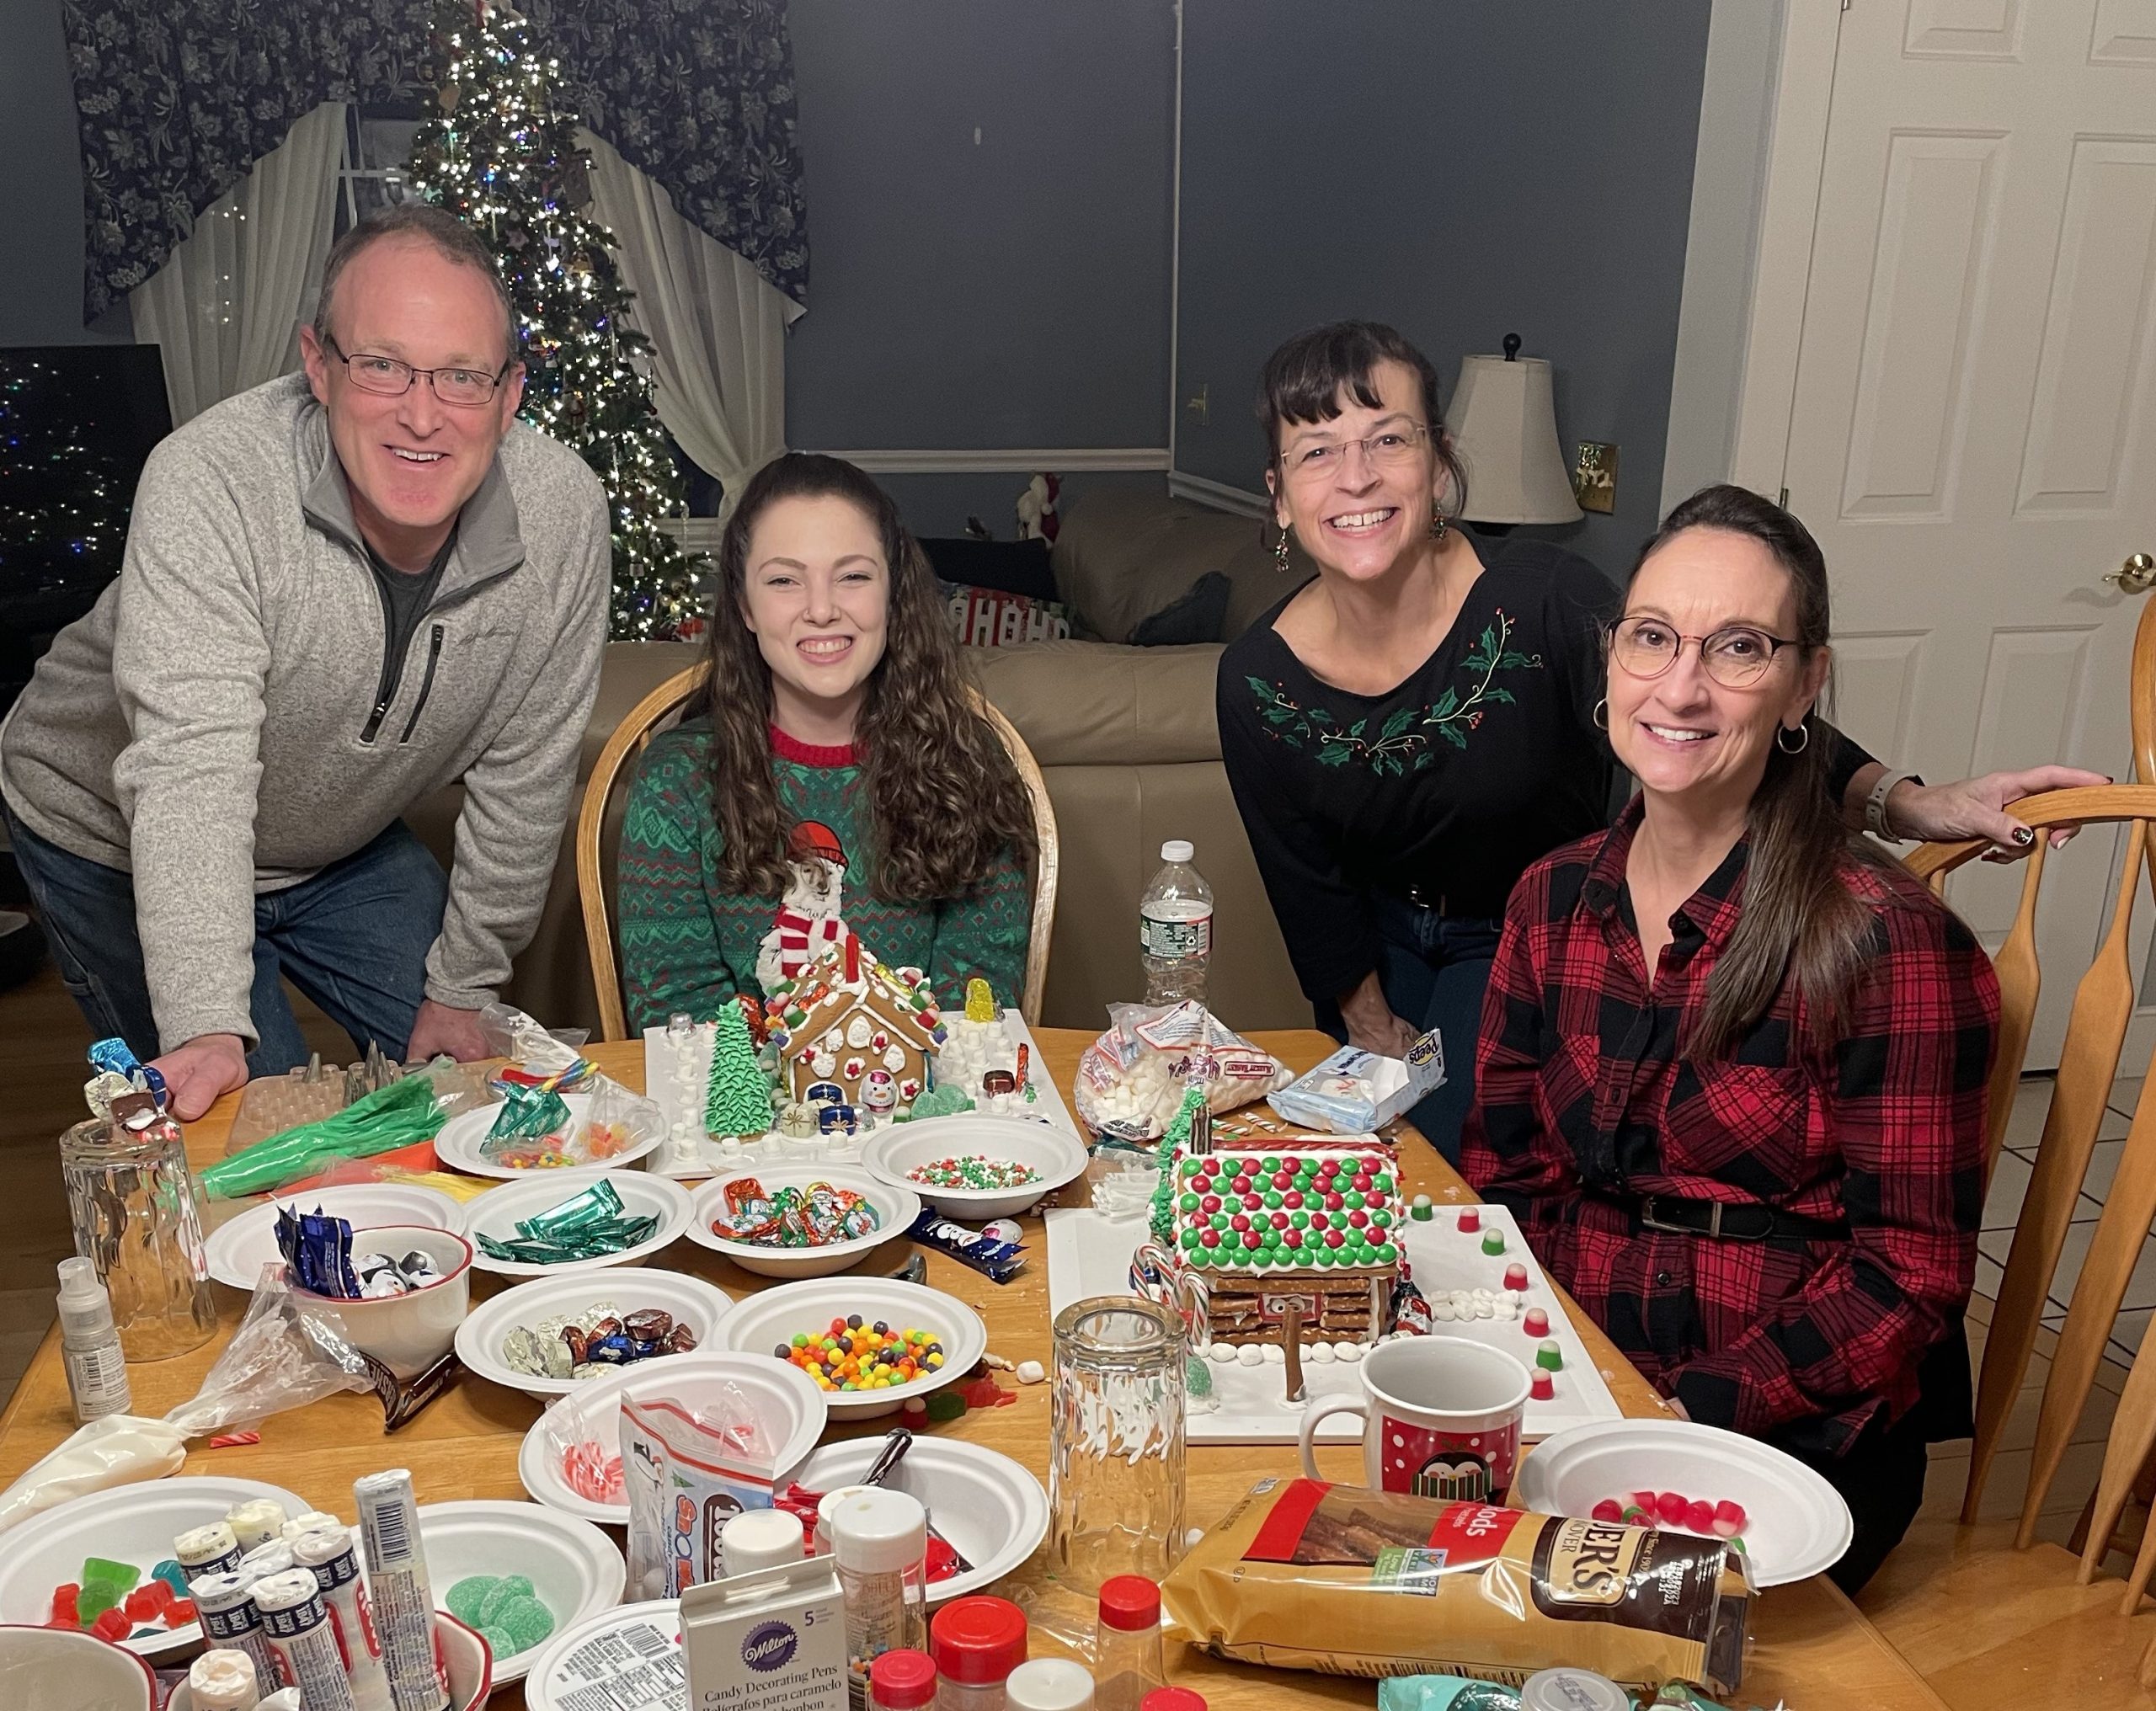 4 People with Gingerbread Houses